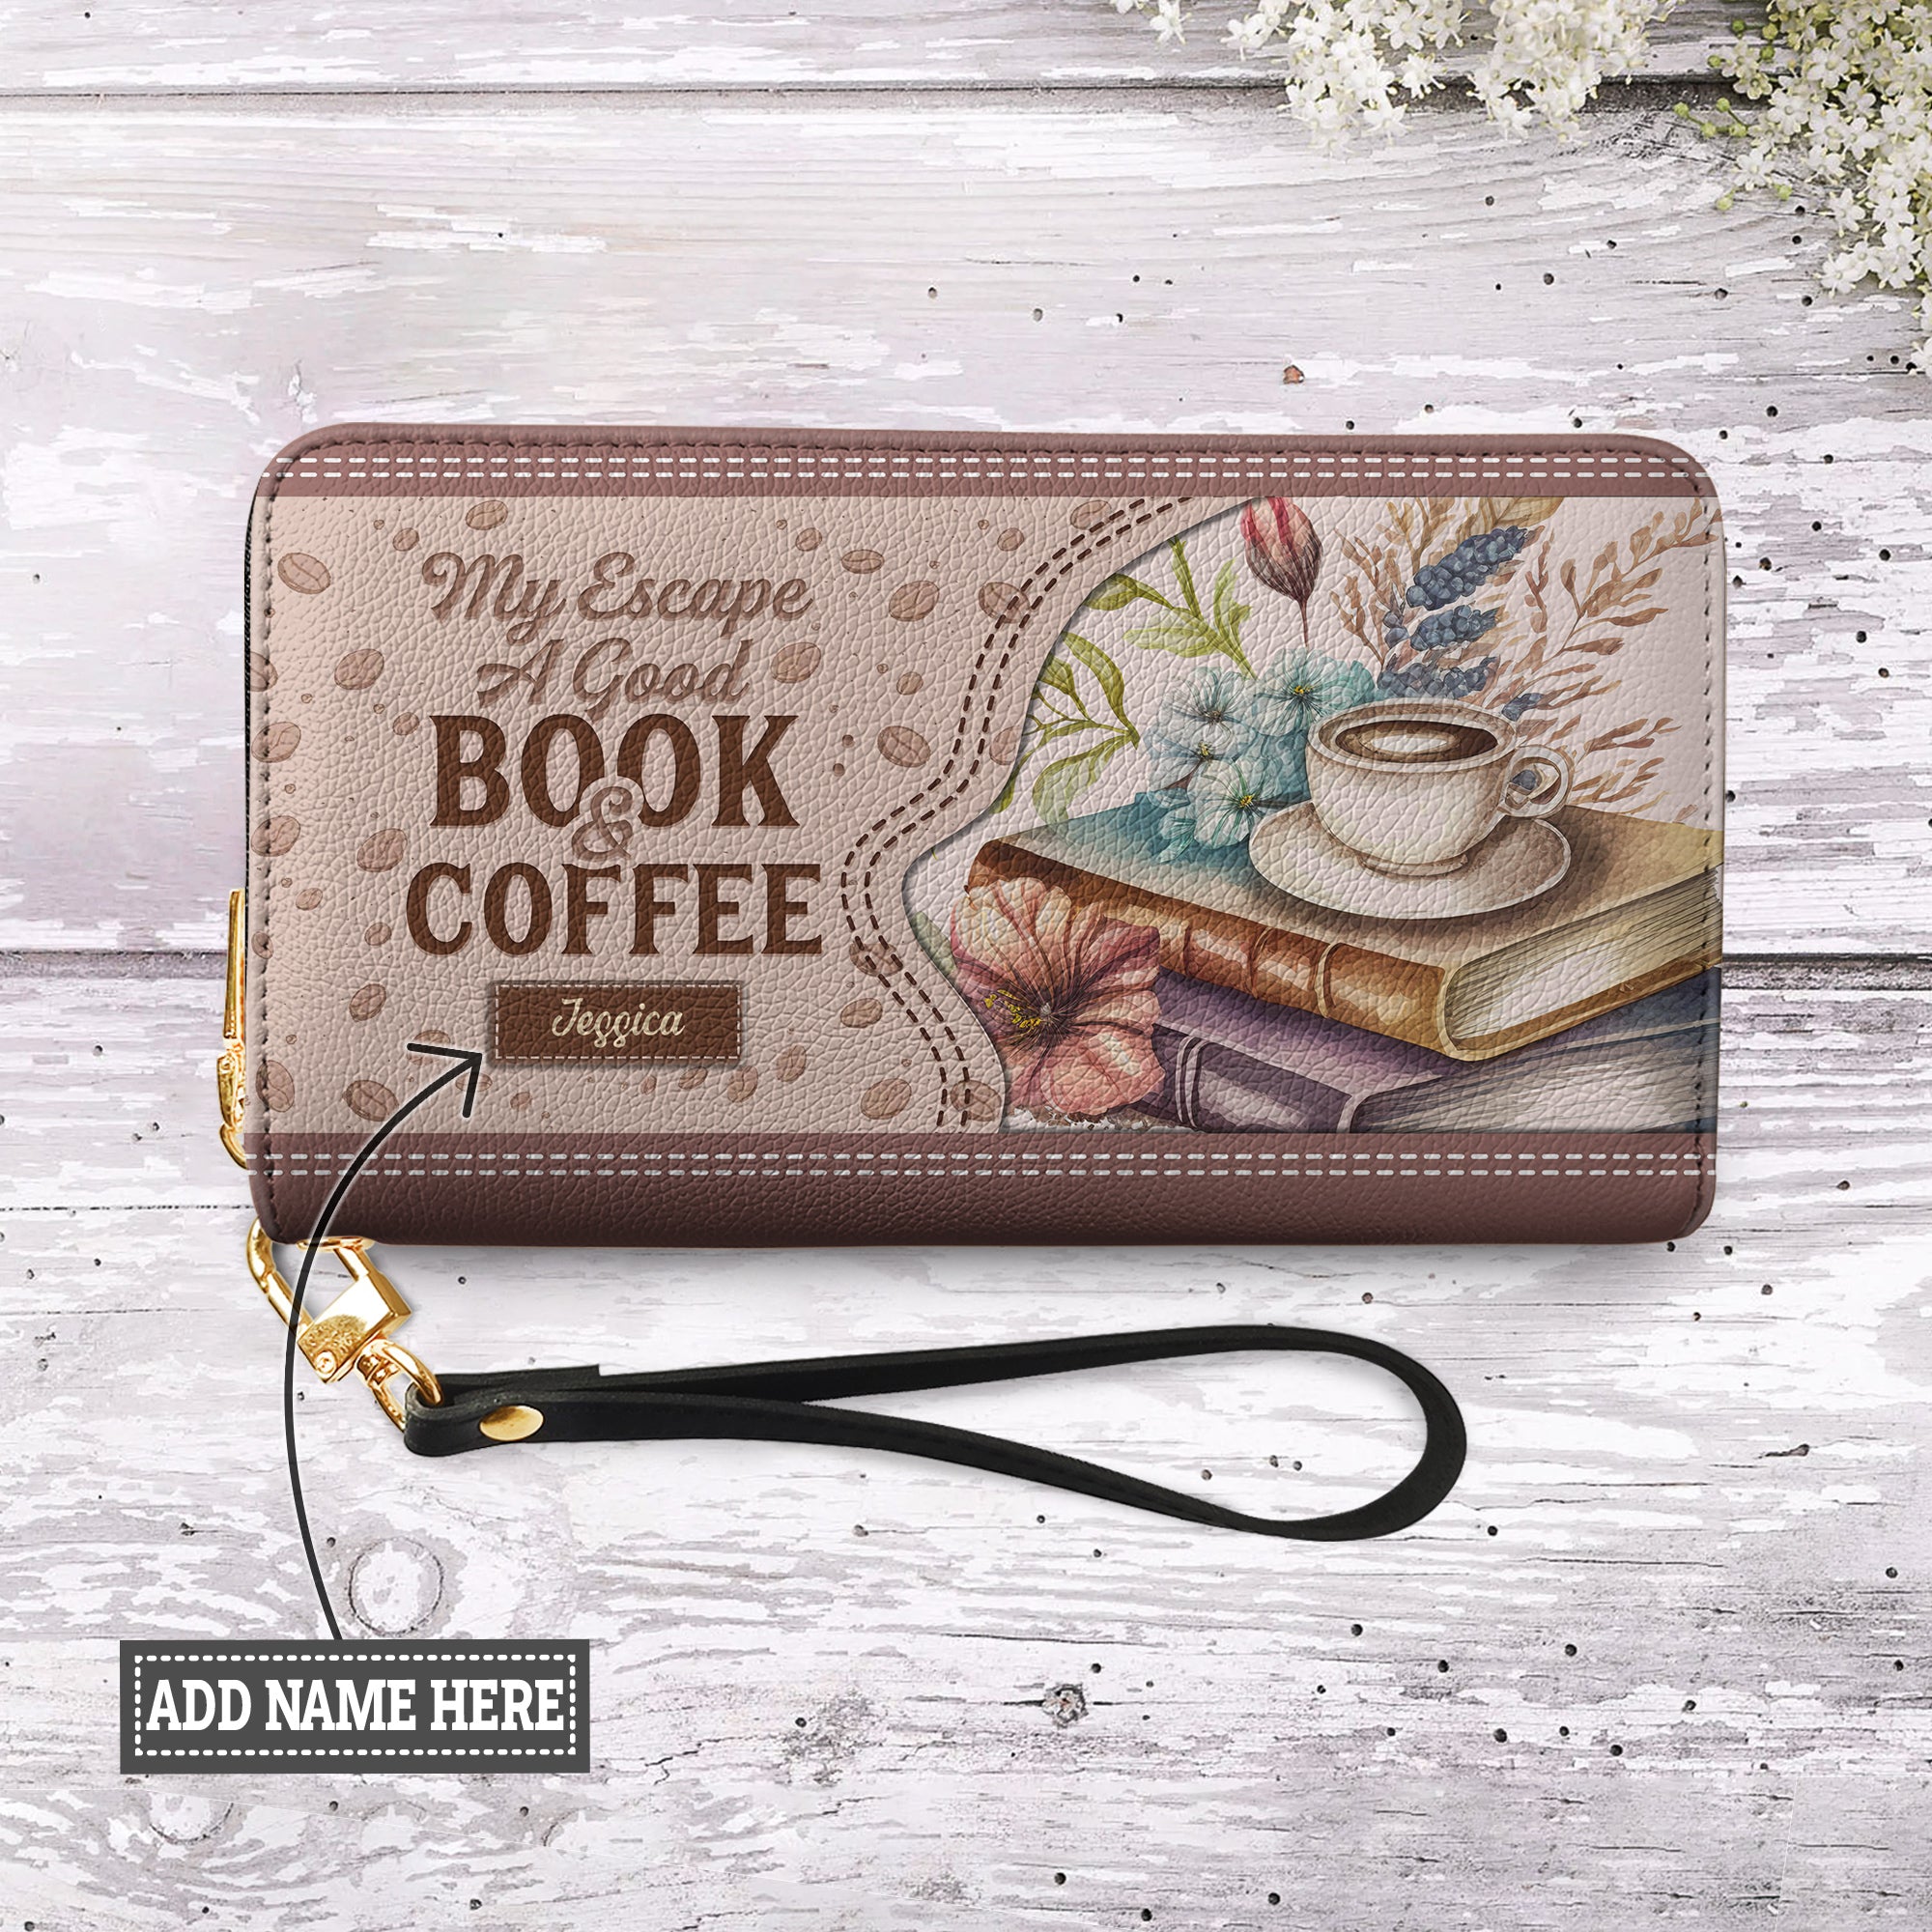 In A World Of Bookworms Be A Book Dragon DNRZ100723684 Zip Around Leat -  The Note Bags